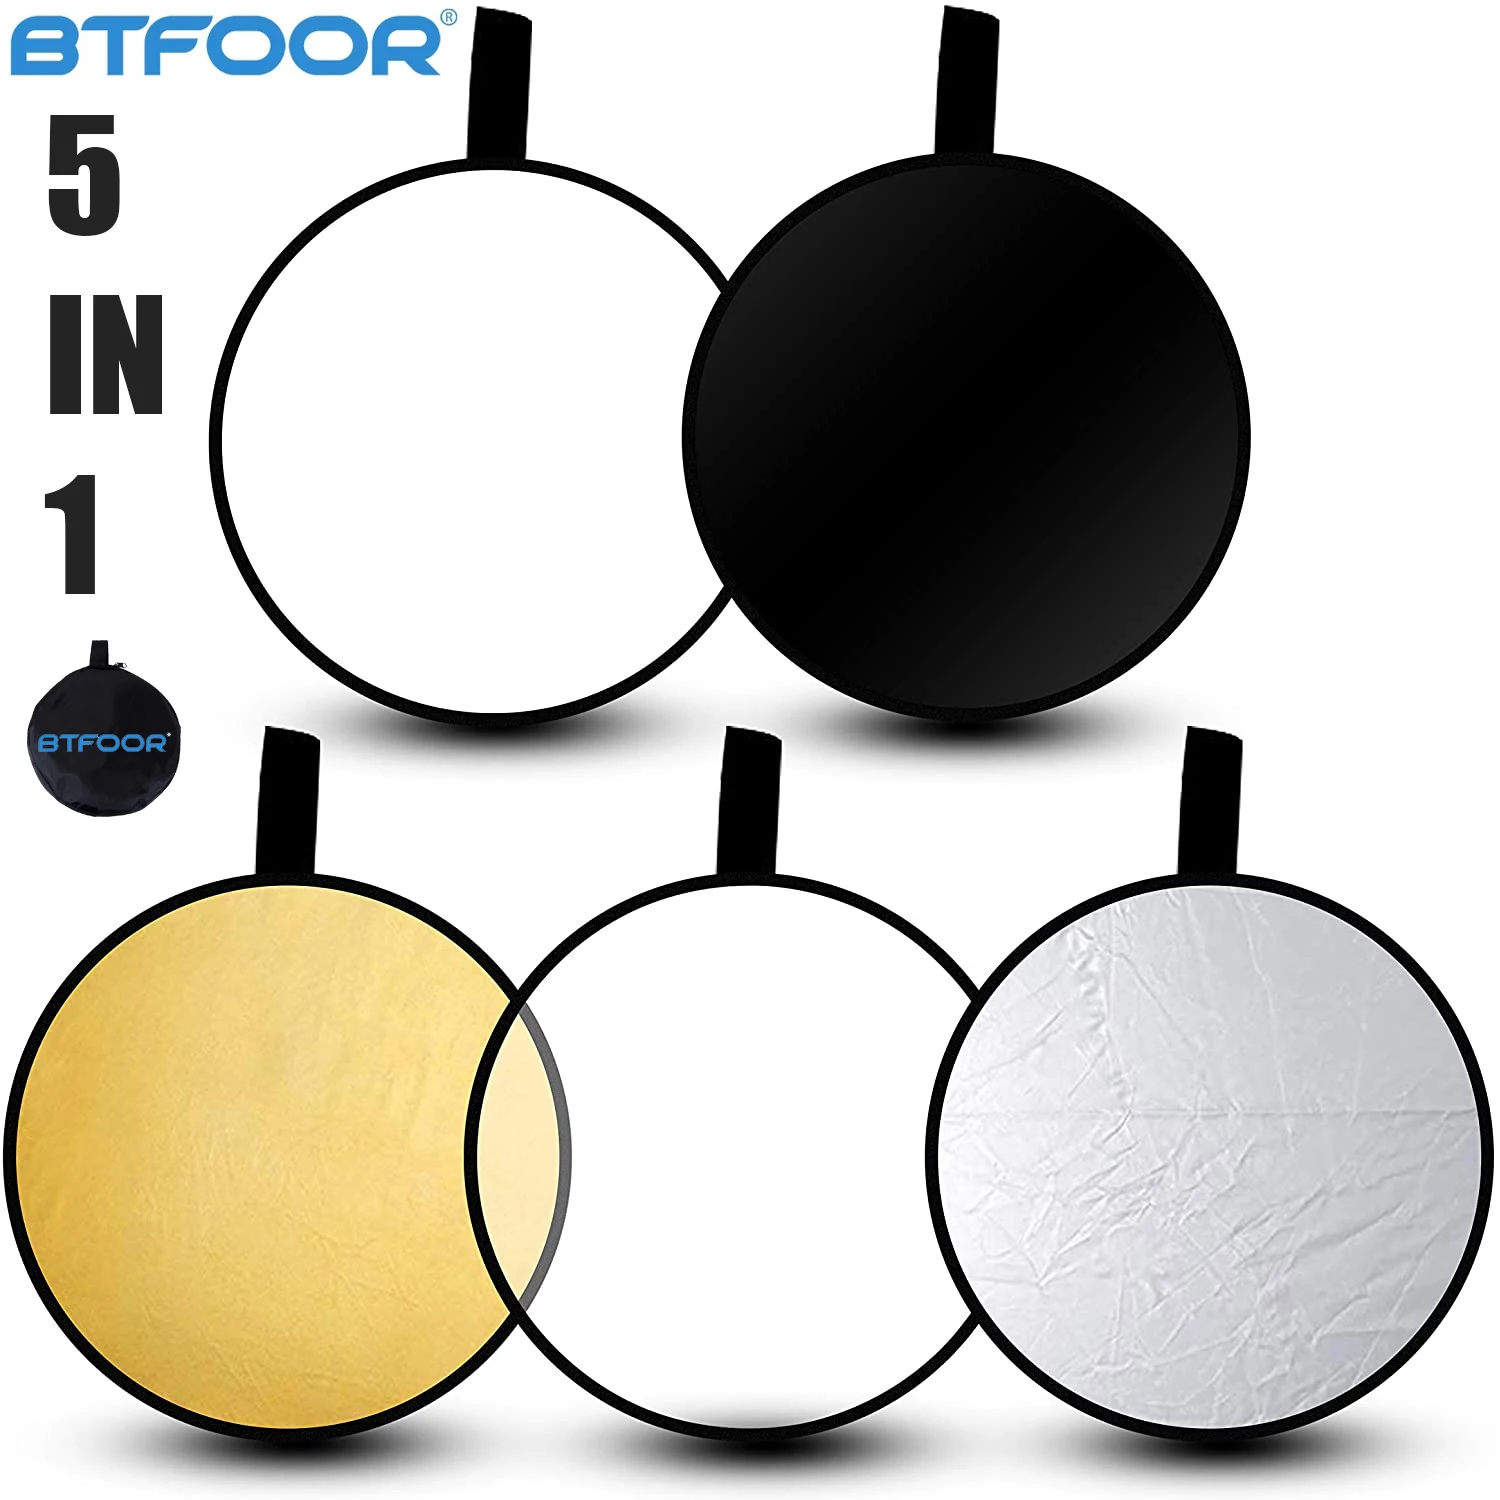 

24" 60cm 5in1 Reflector Photography Collapsible Portable Light Diffuser Round Reflector For Photo Multi Color gold silver black